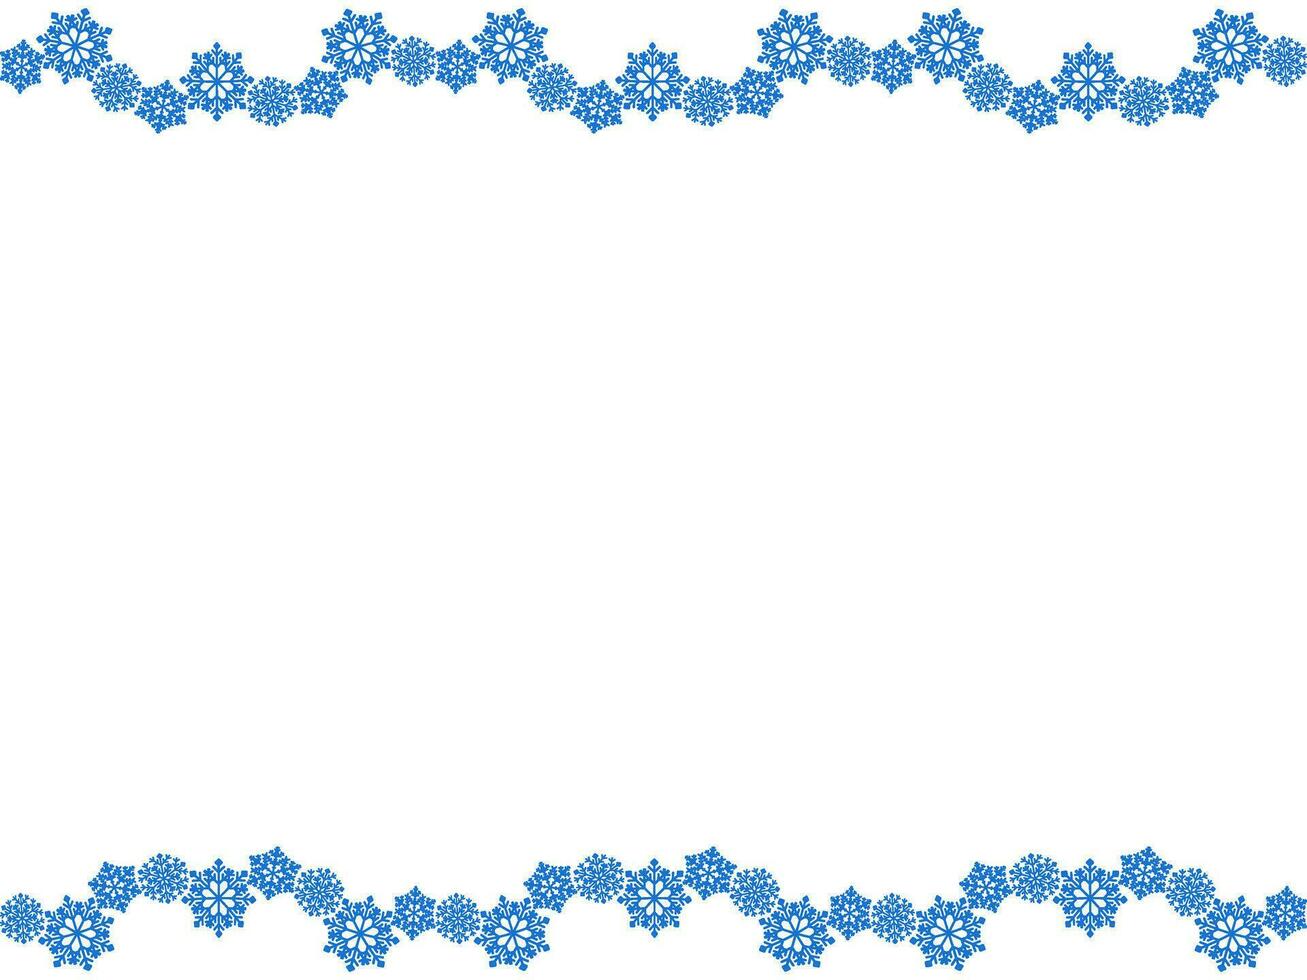 Abstract background with blue snowflakes. Vector illustration with copy space for text